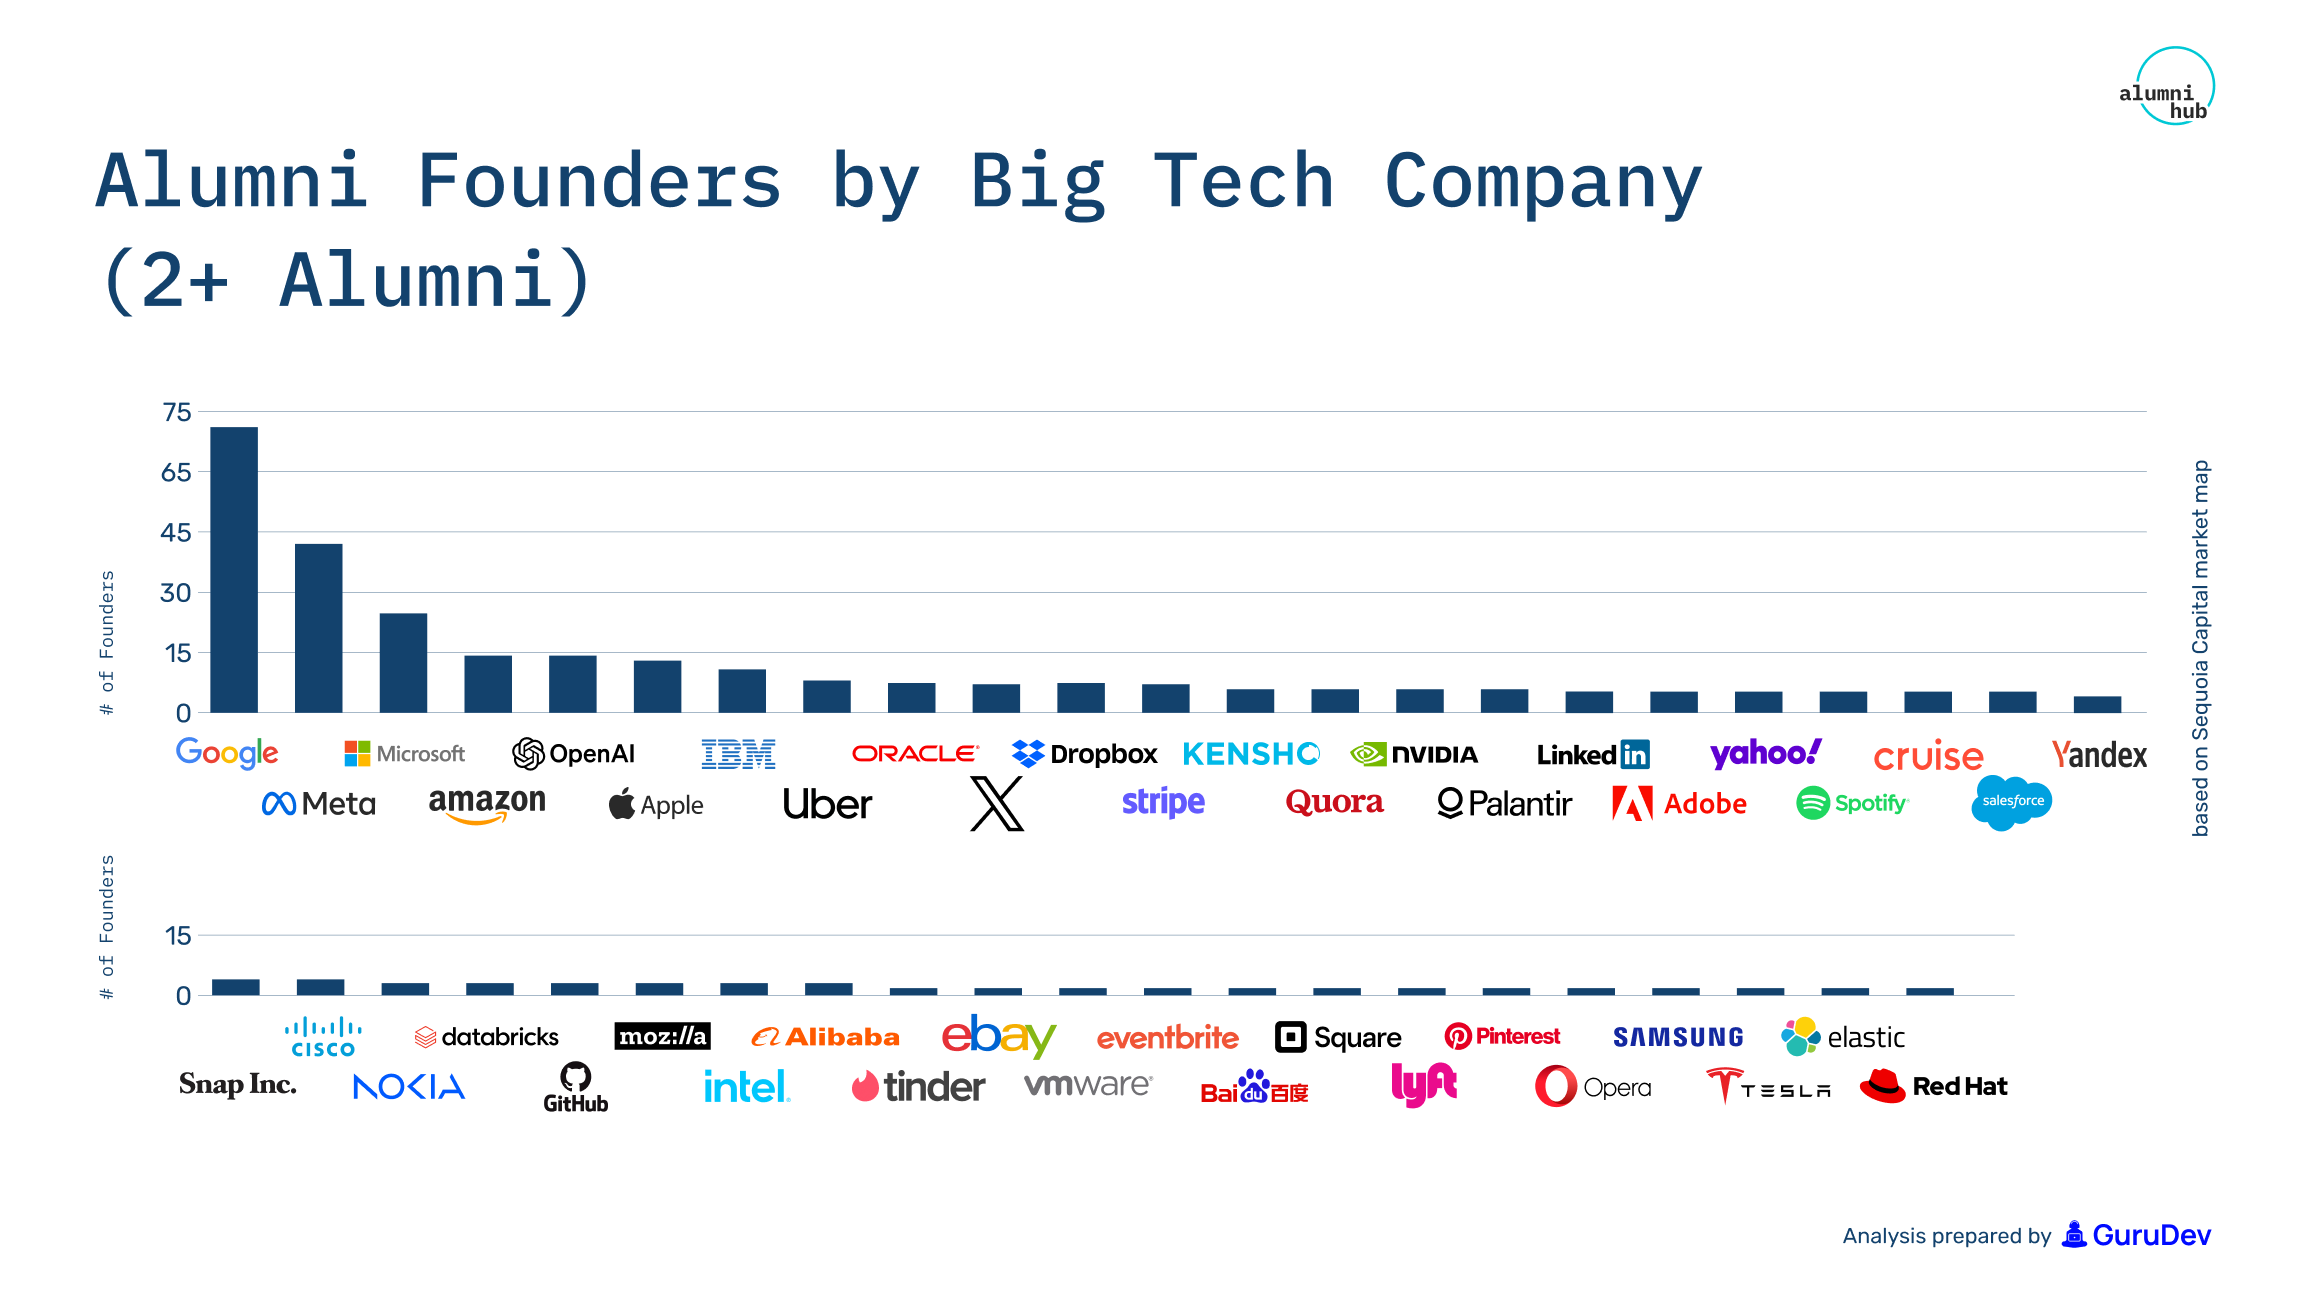 Bar chart showing the number of Alumni founders by Big Tech companies.